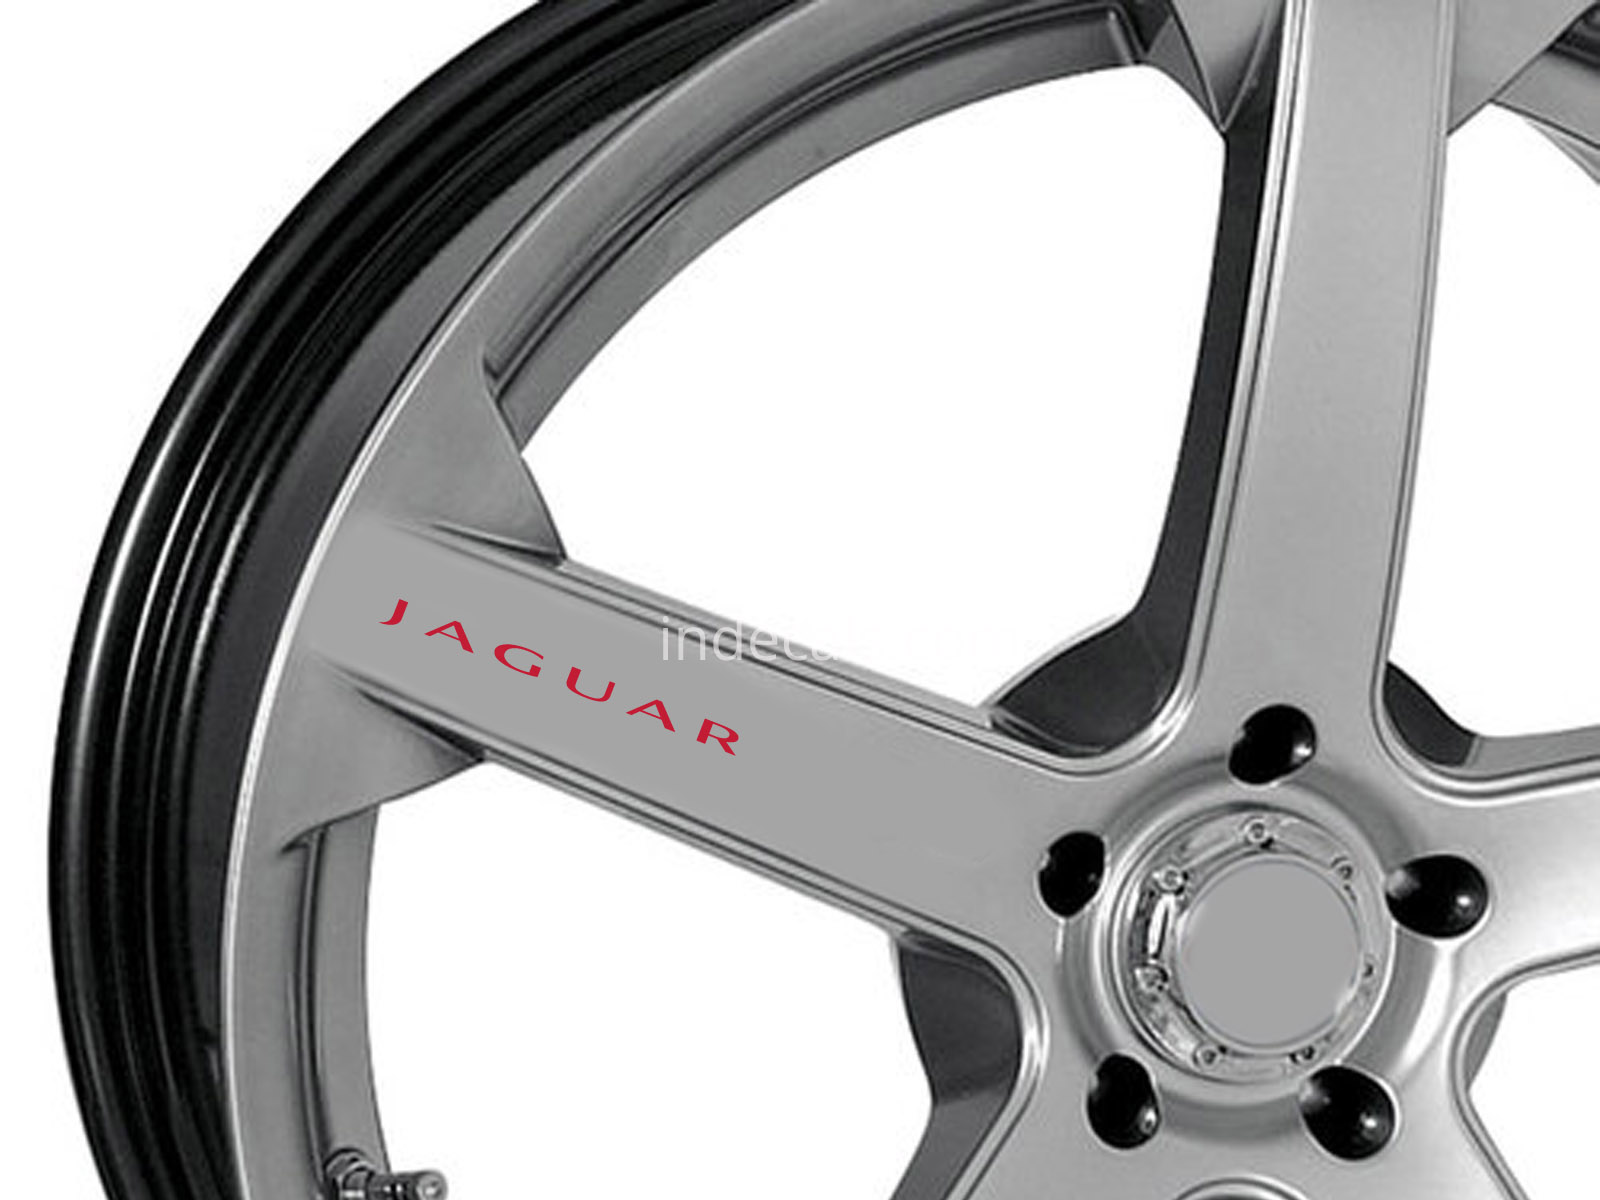 6 x Jaguar Stickers for Wheels - Red